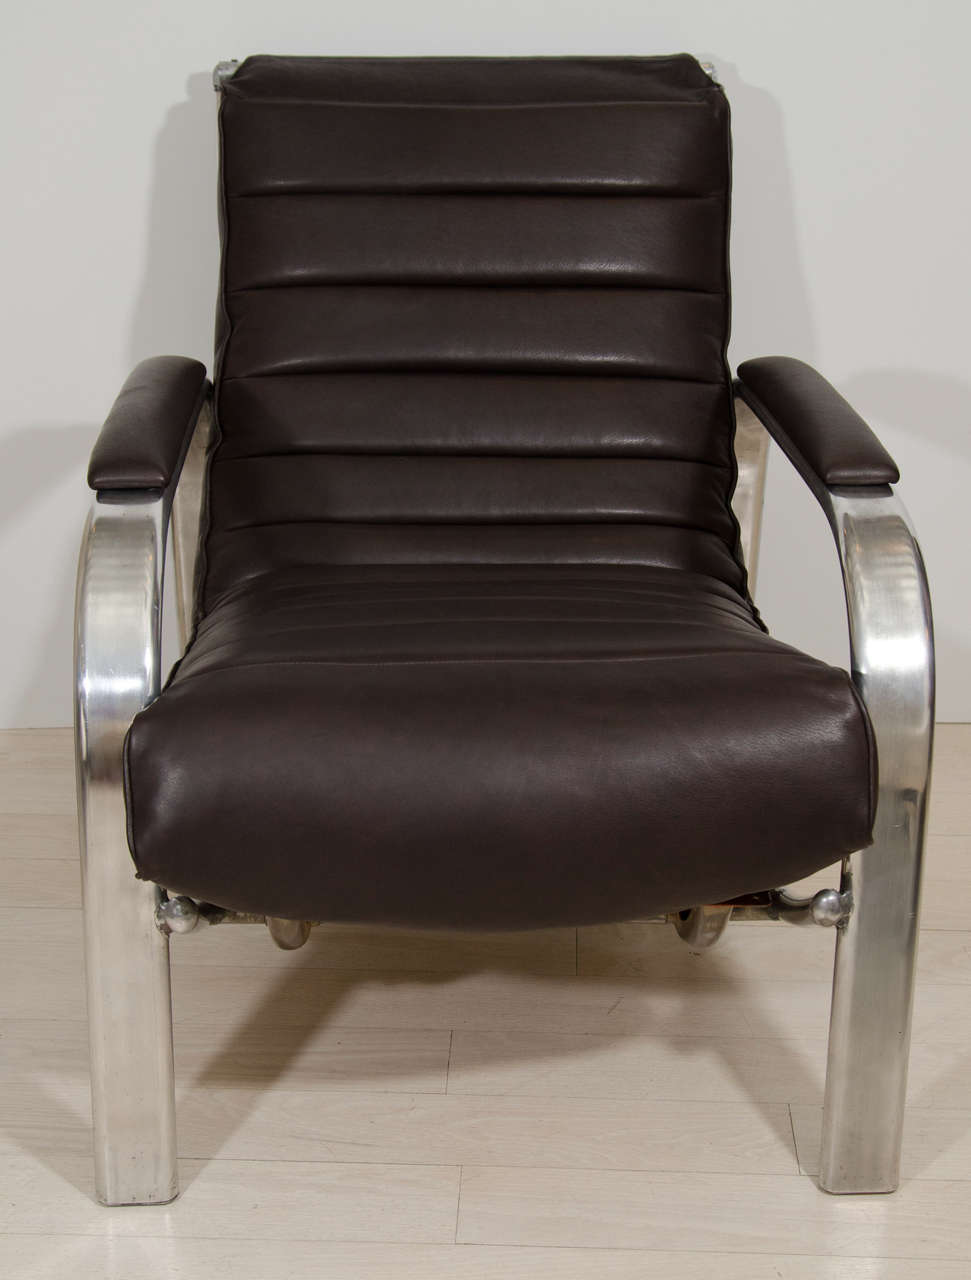 Pair of polished aluminum easy chairs by Christie Tyler with newly upholstered brown leather 